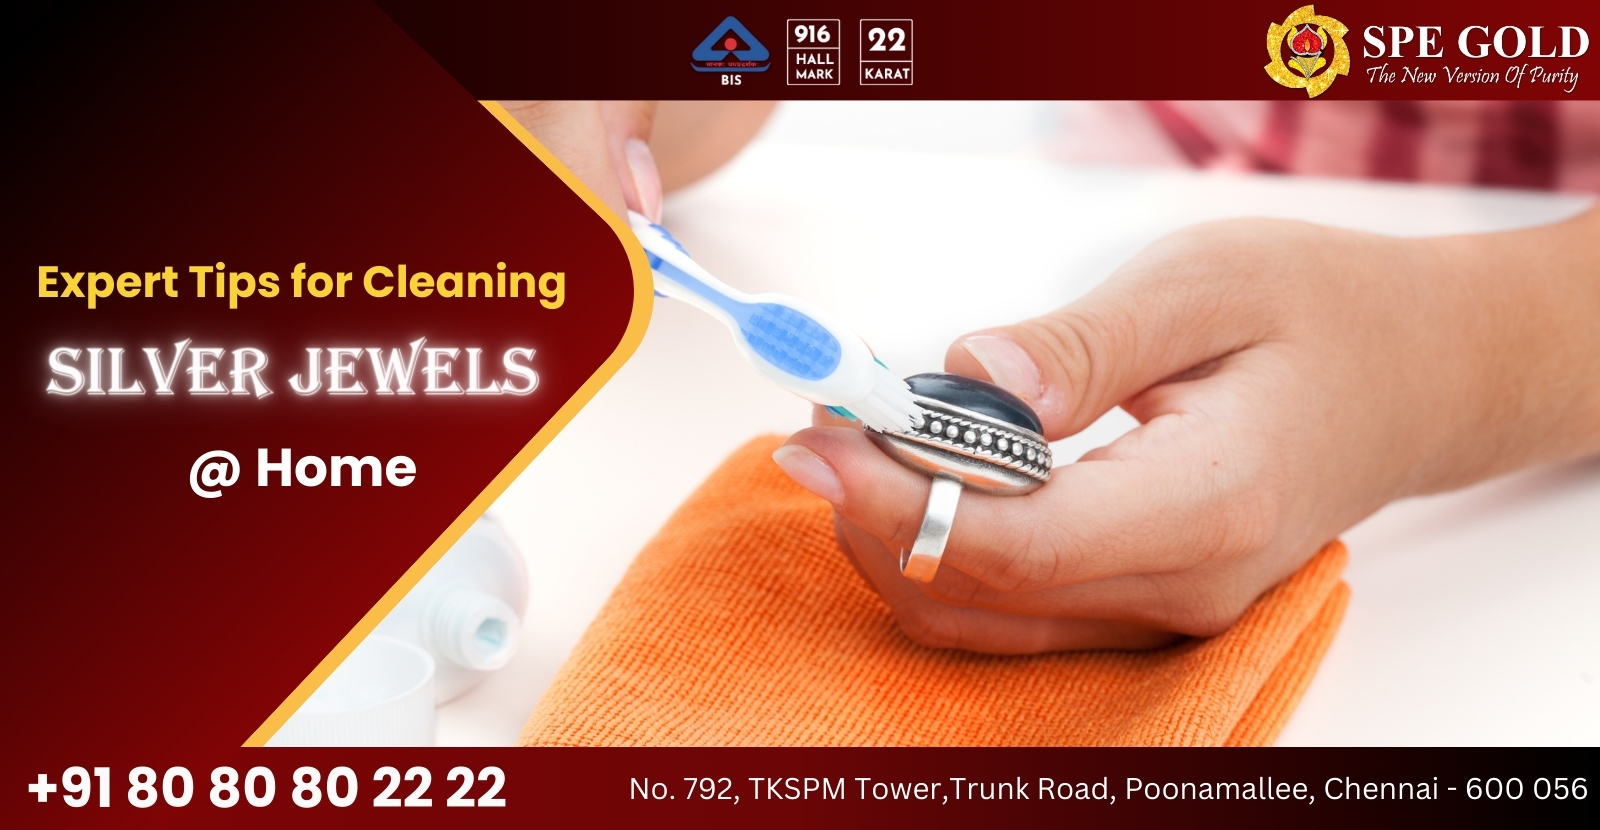 Expert-Tips-for-Cleaning-Silver-Jewels-at-Home-01